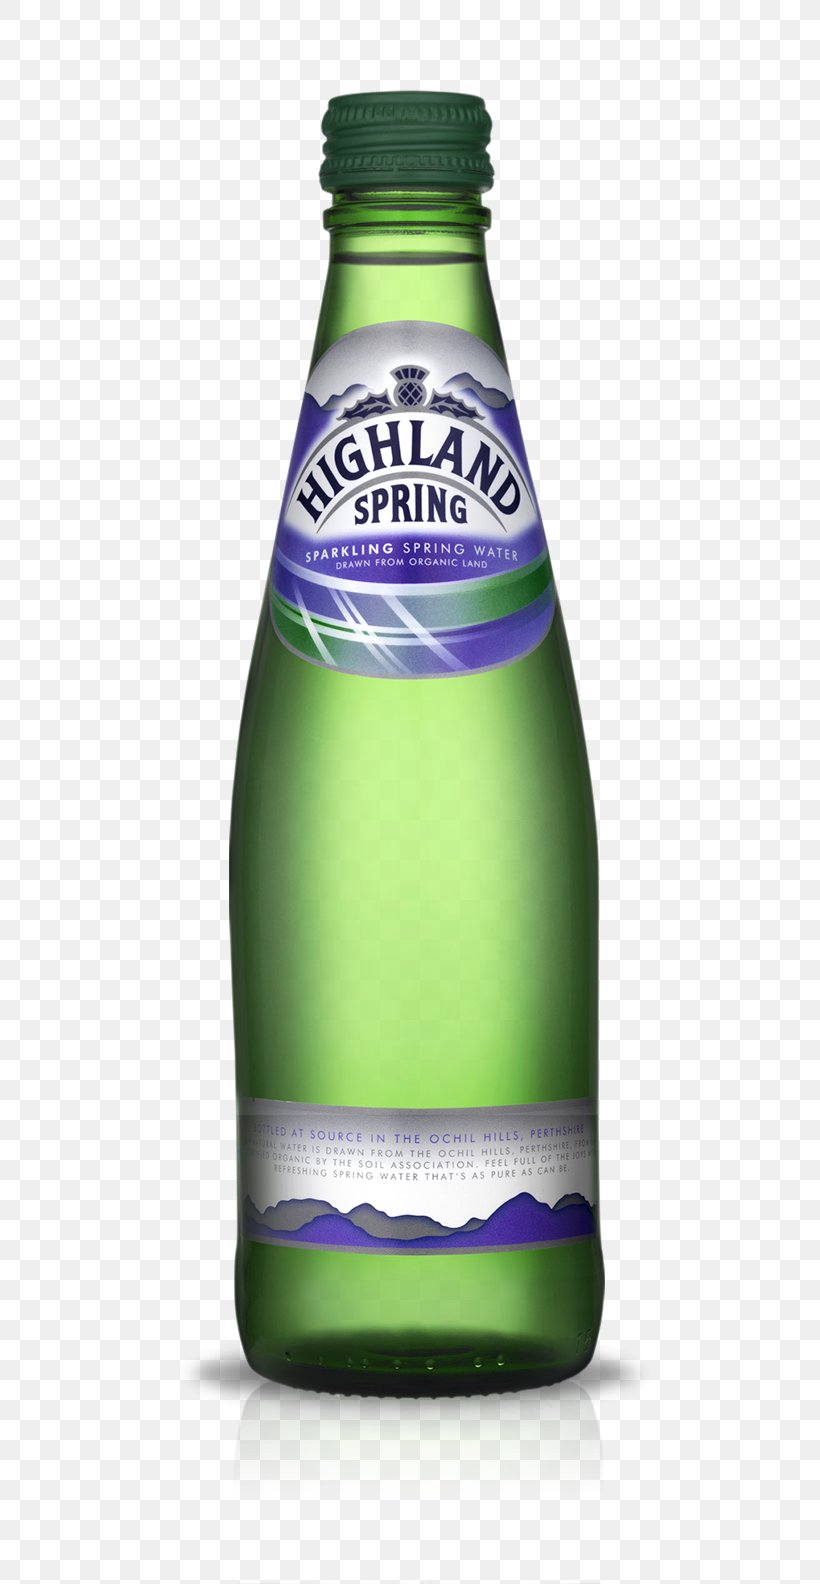 Mineral Water Carbonated Water Highland Spring Beer Glass Bottle, PNG, 510x1584px, Mineral Water, Beer, Beer Bottle, Bottle, Bottled Water Download Free